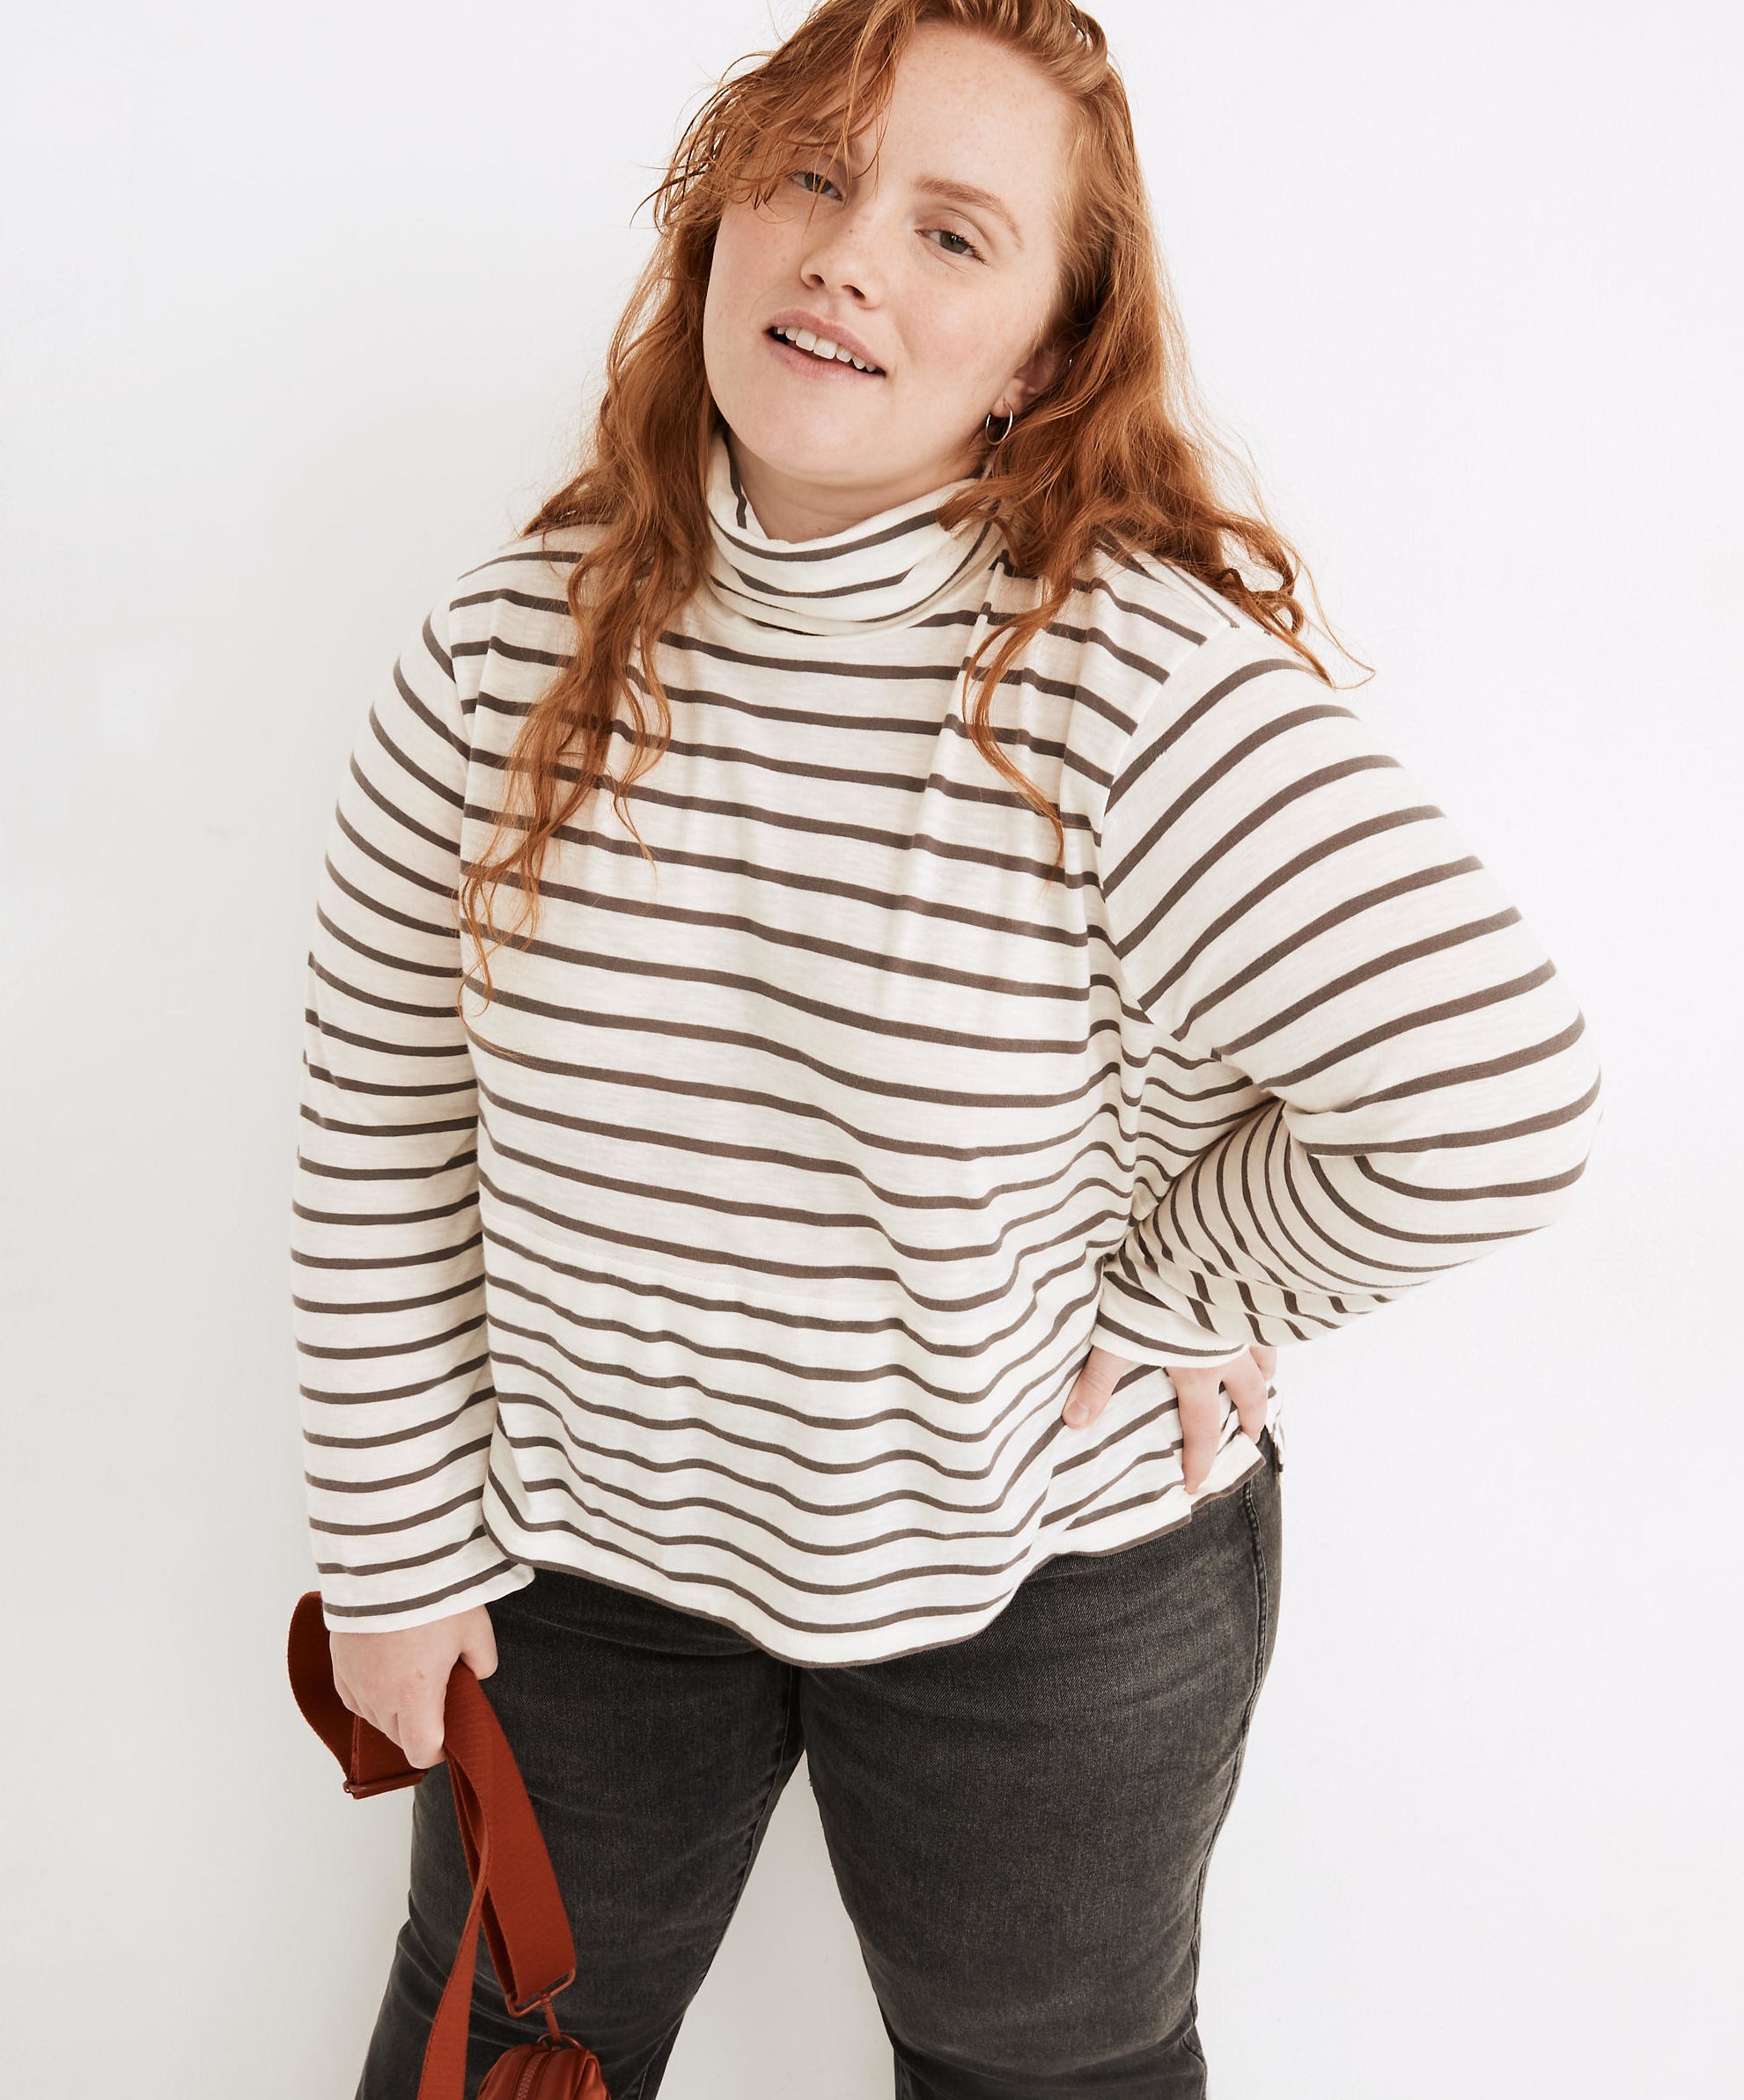 Model is wearing a white and brown striped turtleneck sweater and black denim jeans